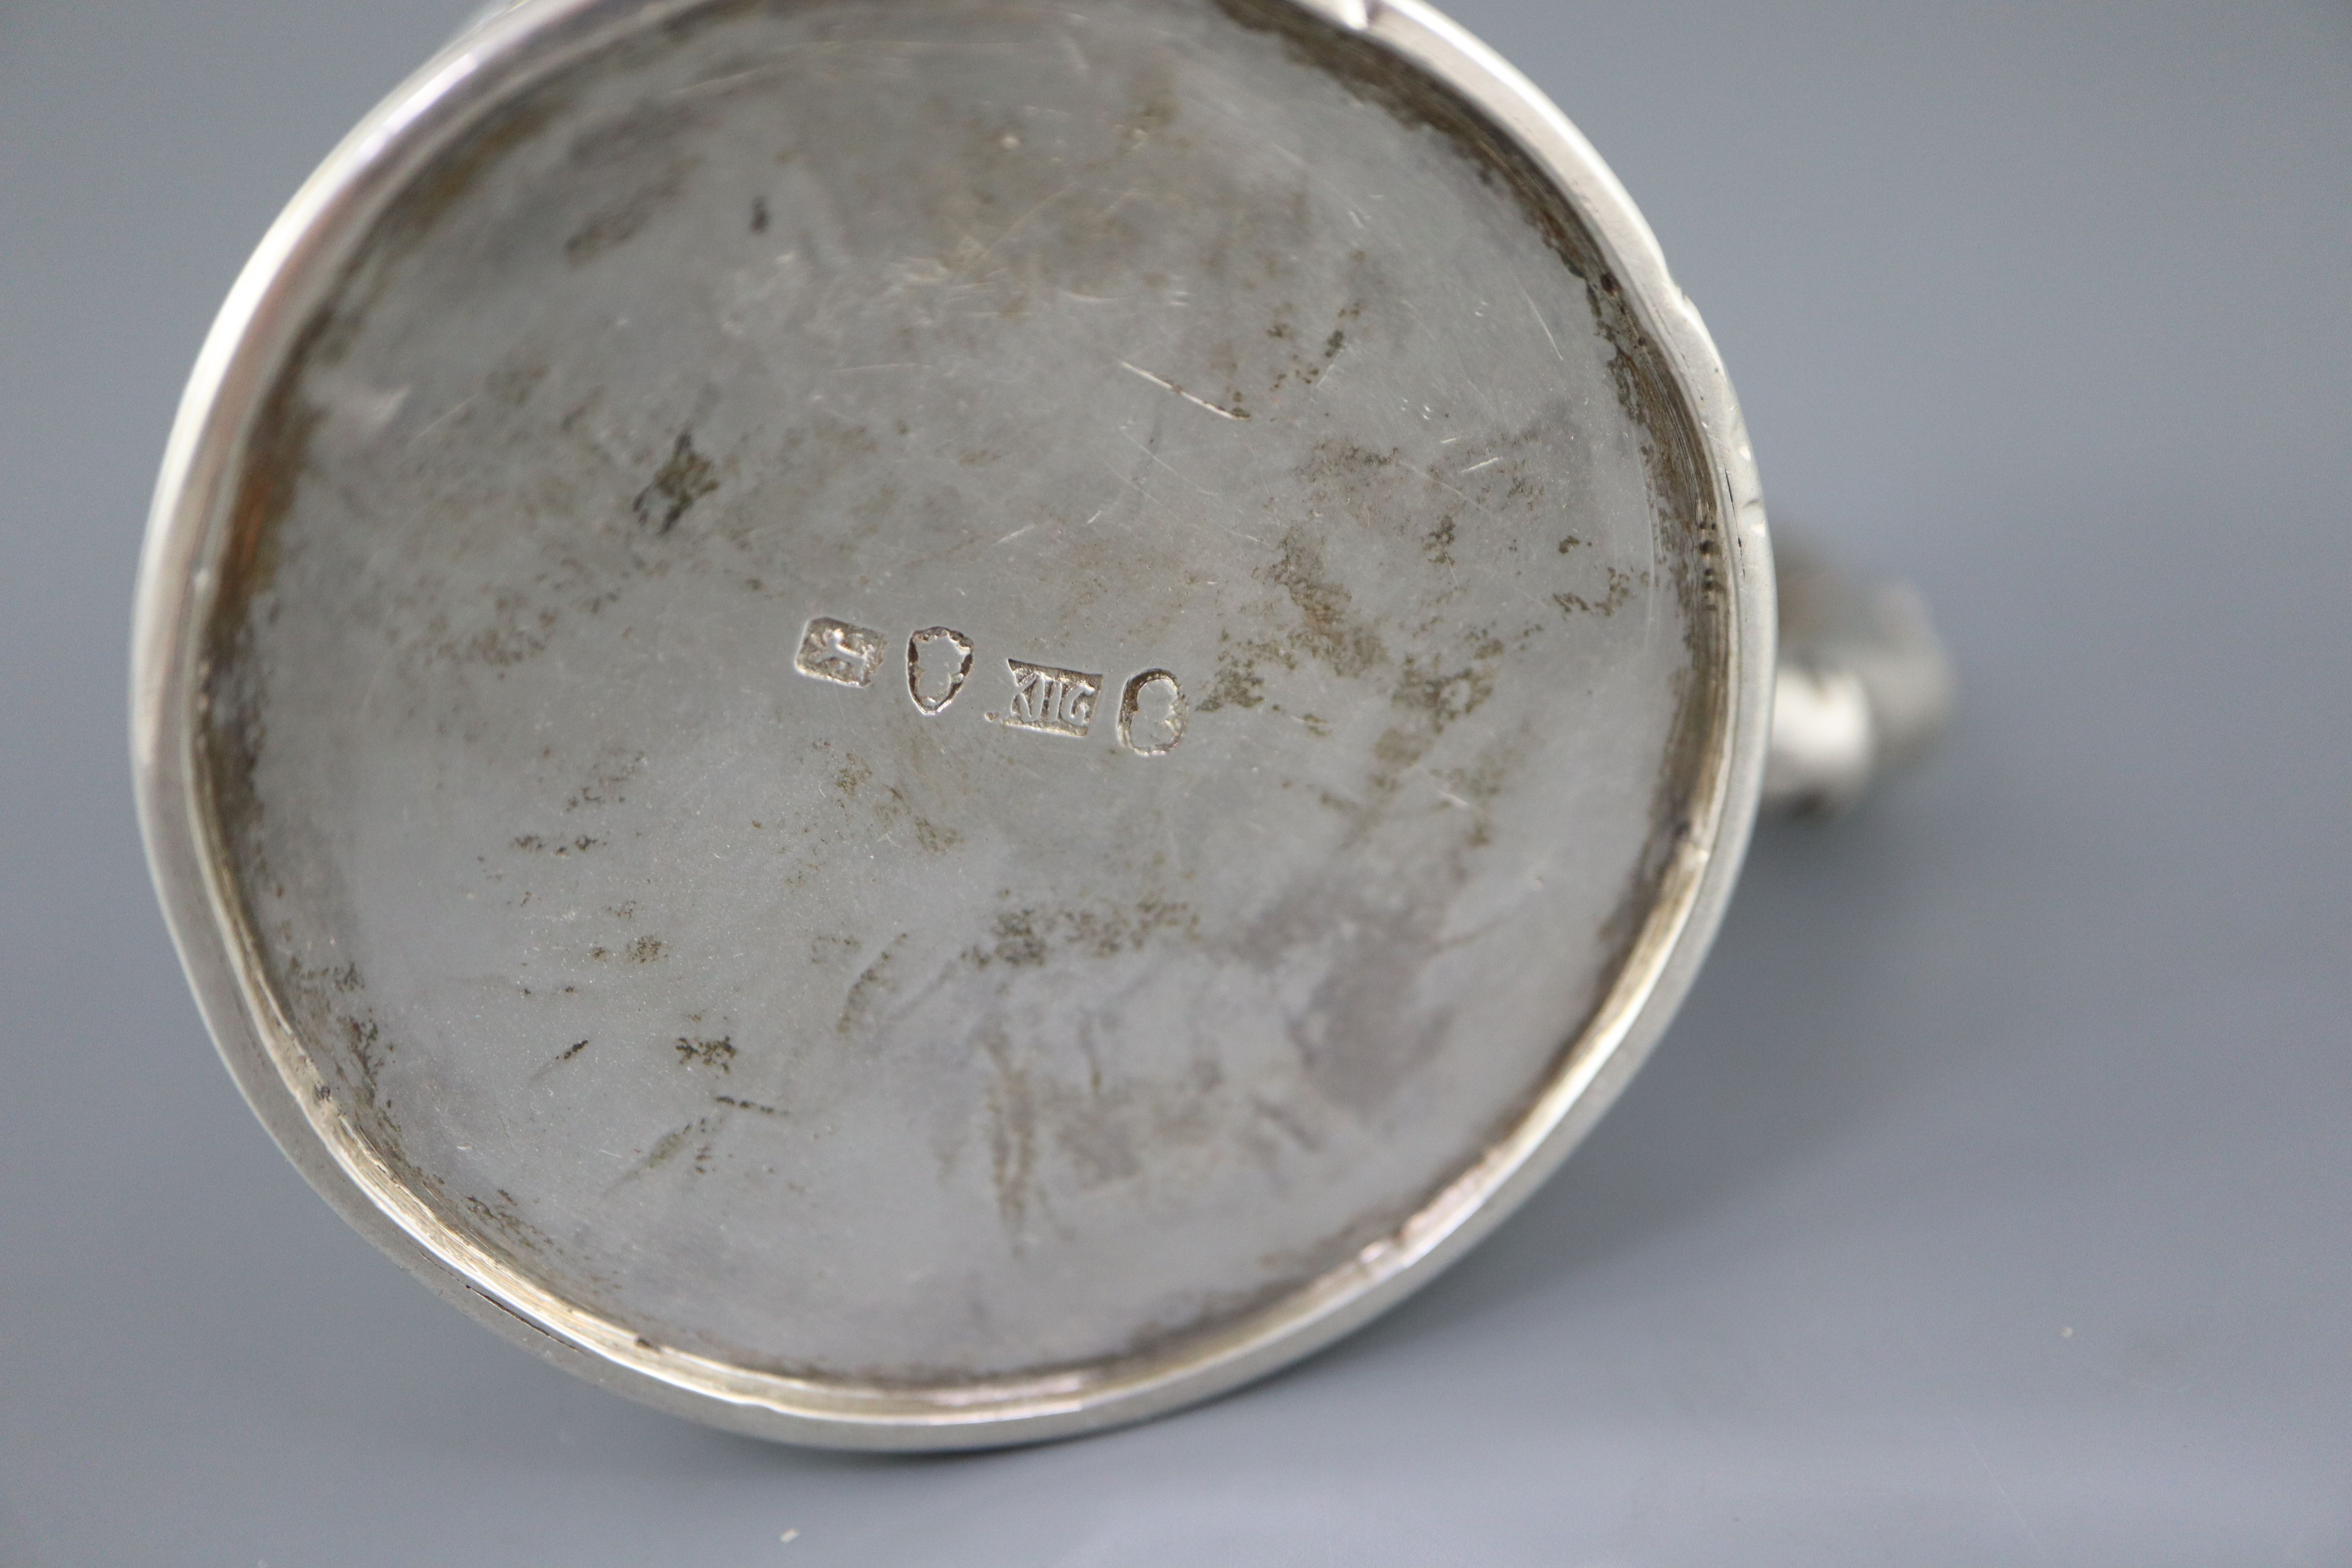 A 19th century Chinese Export silver mug, by Khecheong?,